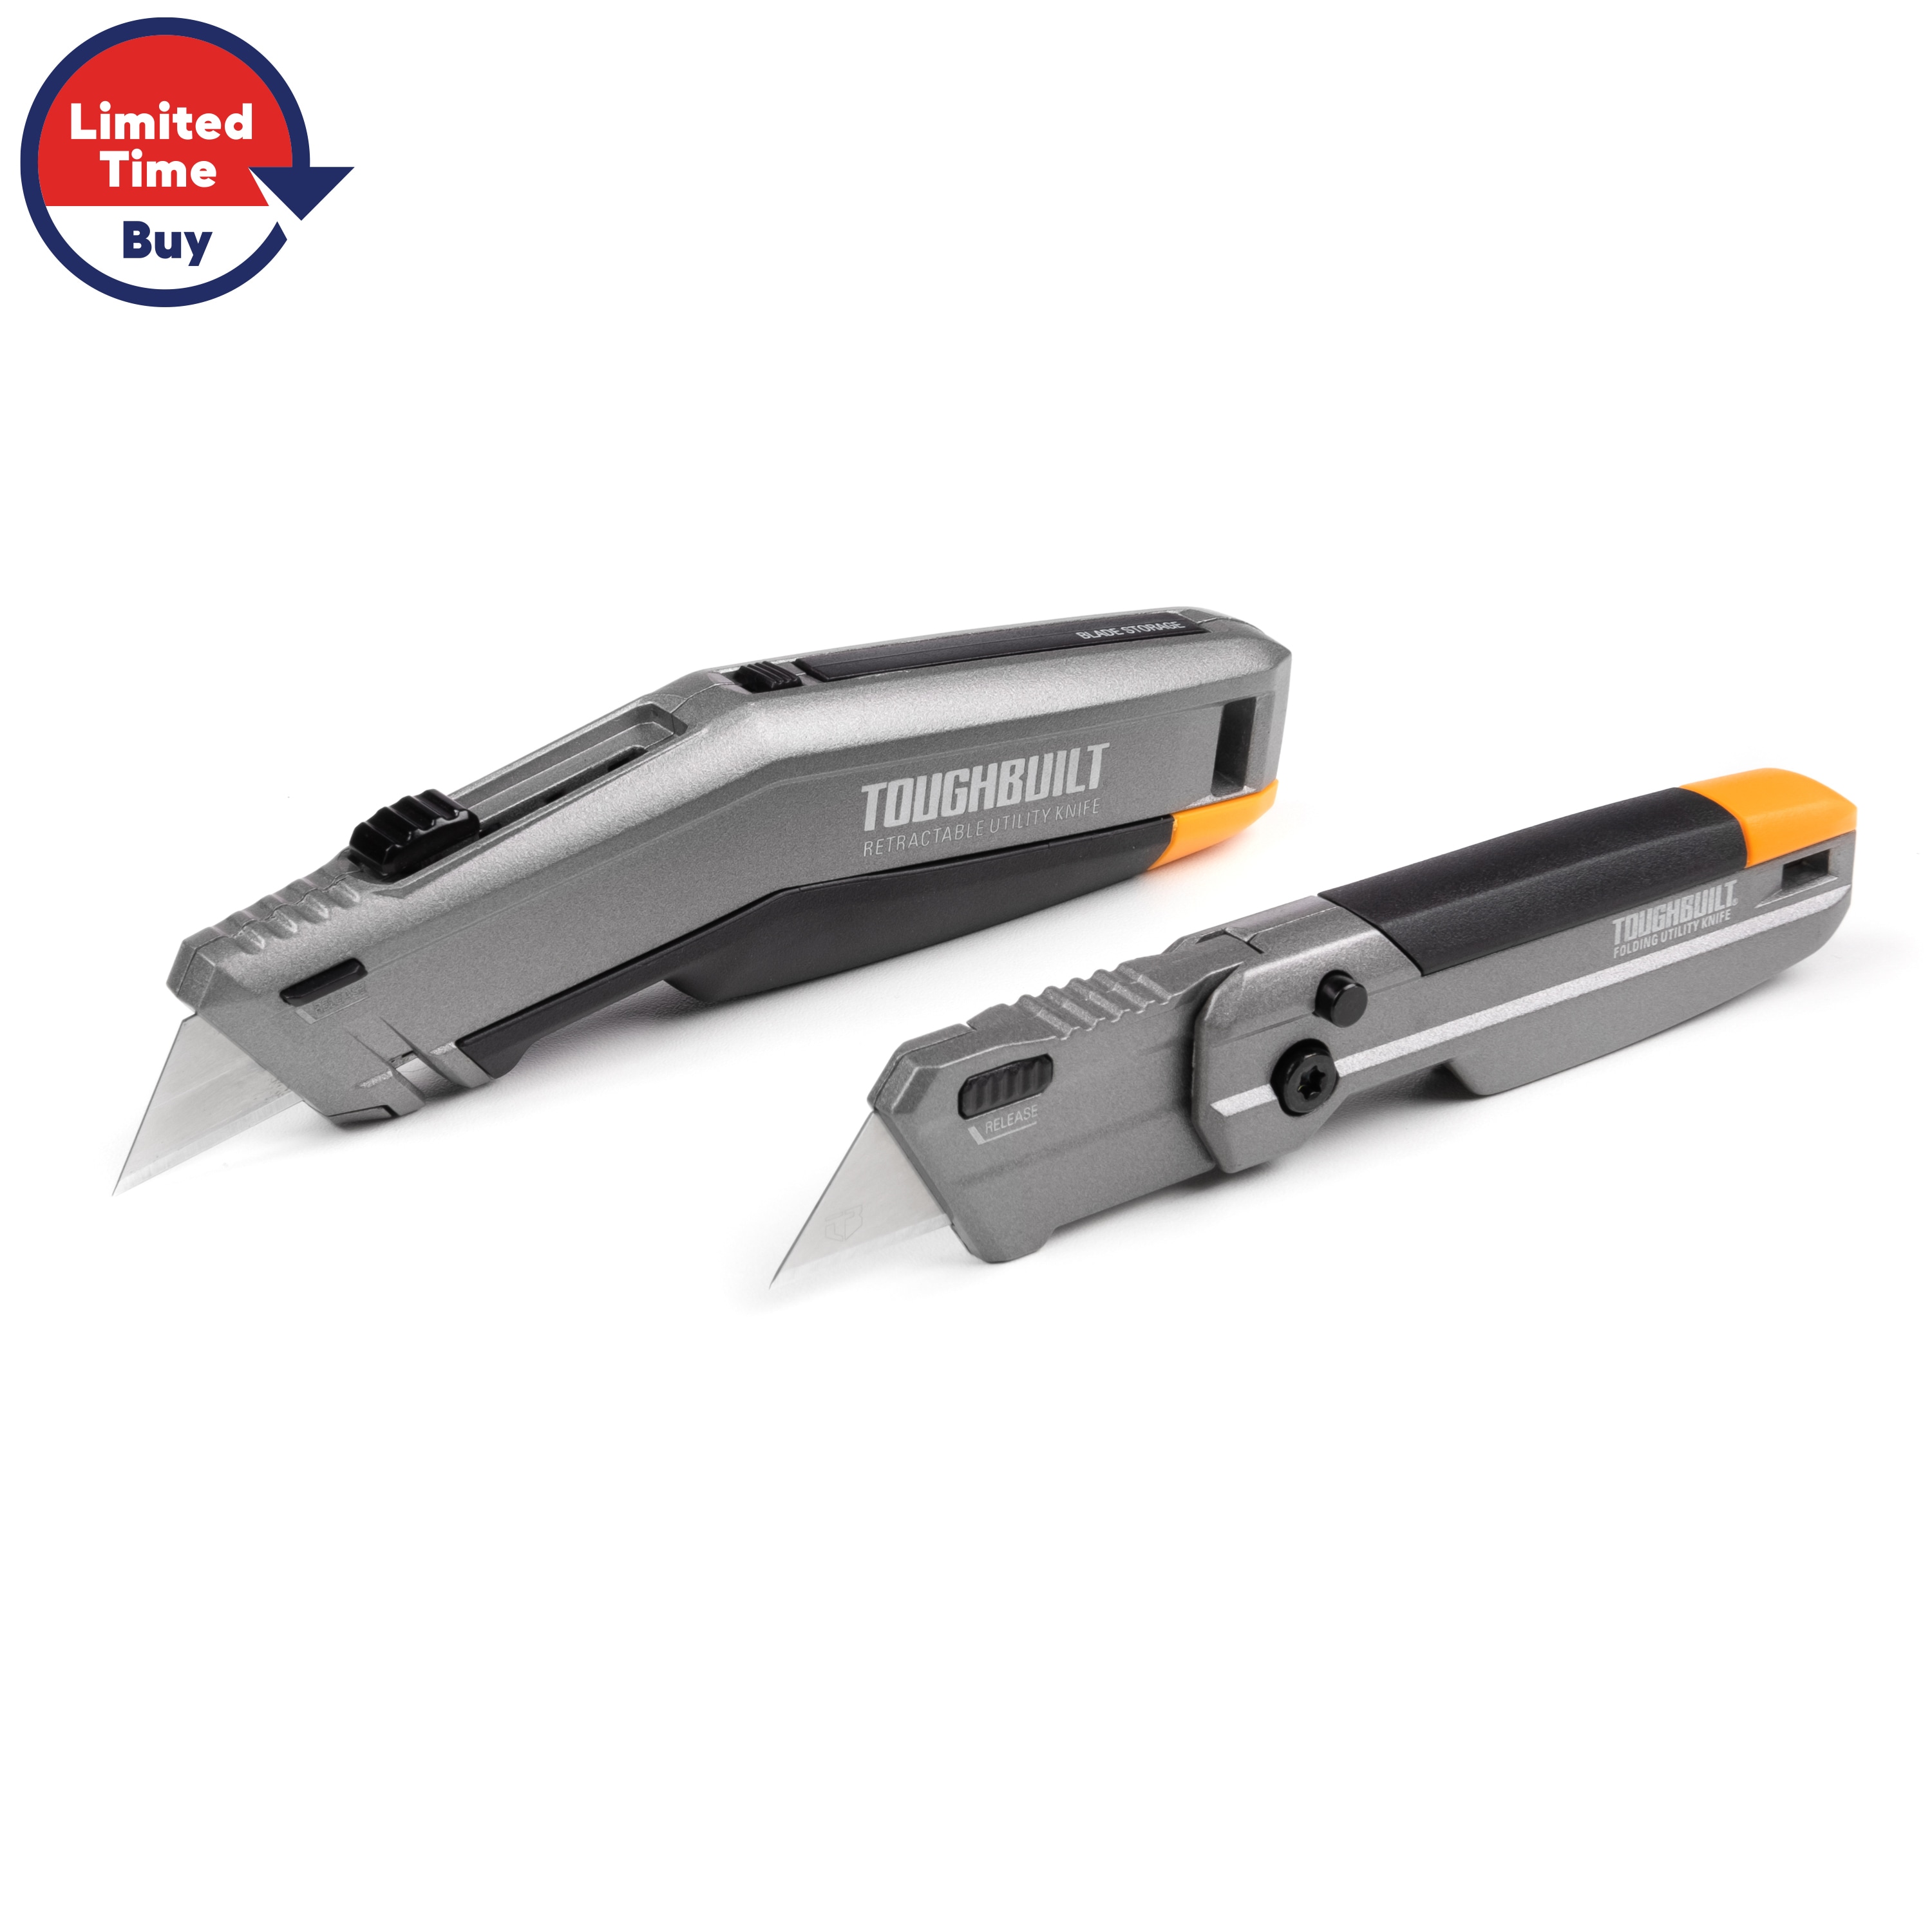 2-Piece TOUGHBUILT Household Tool Set (Utility Knife Set) $10 at Lowe's w/ Free Store Pickup